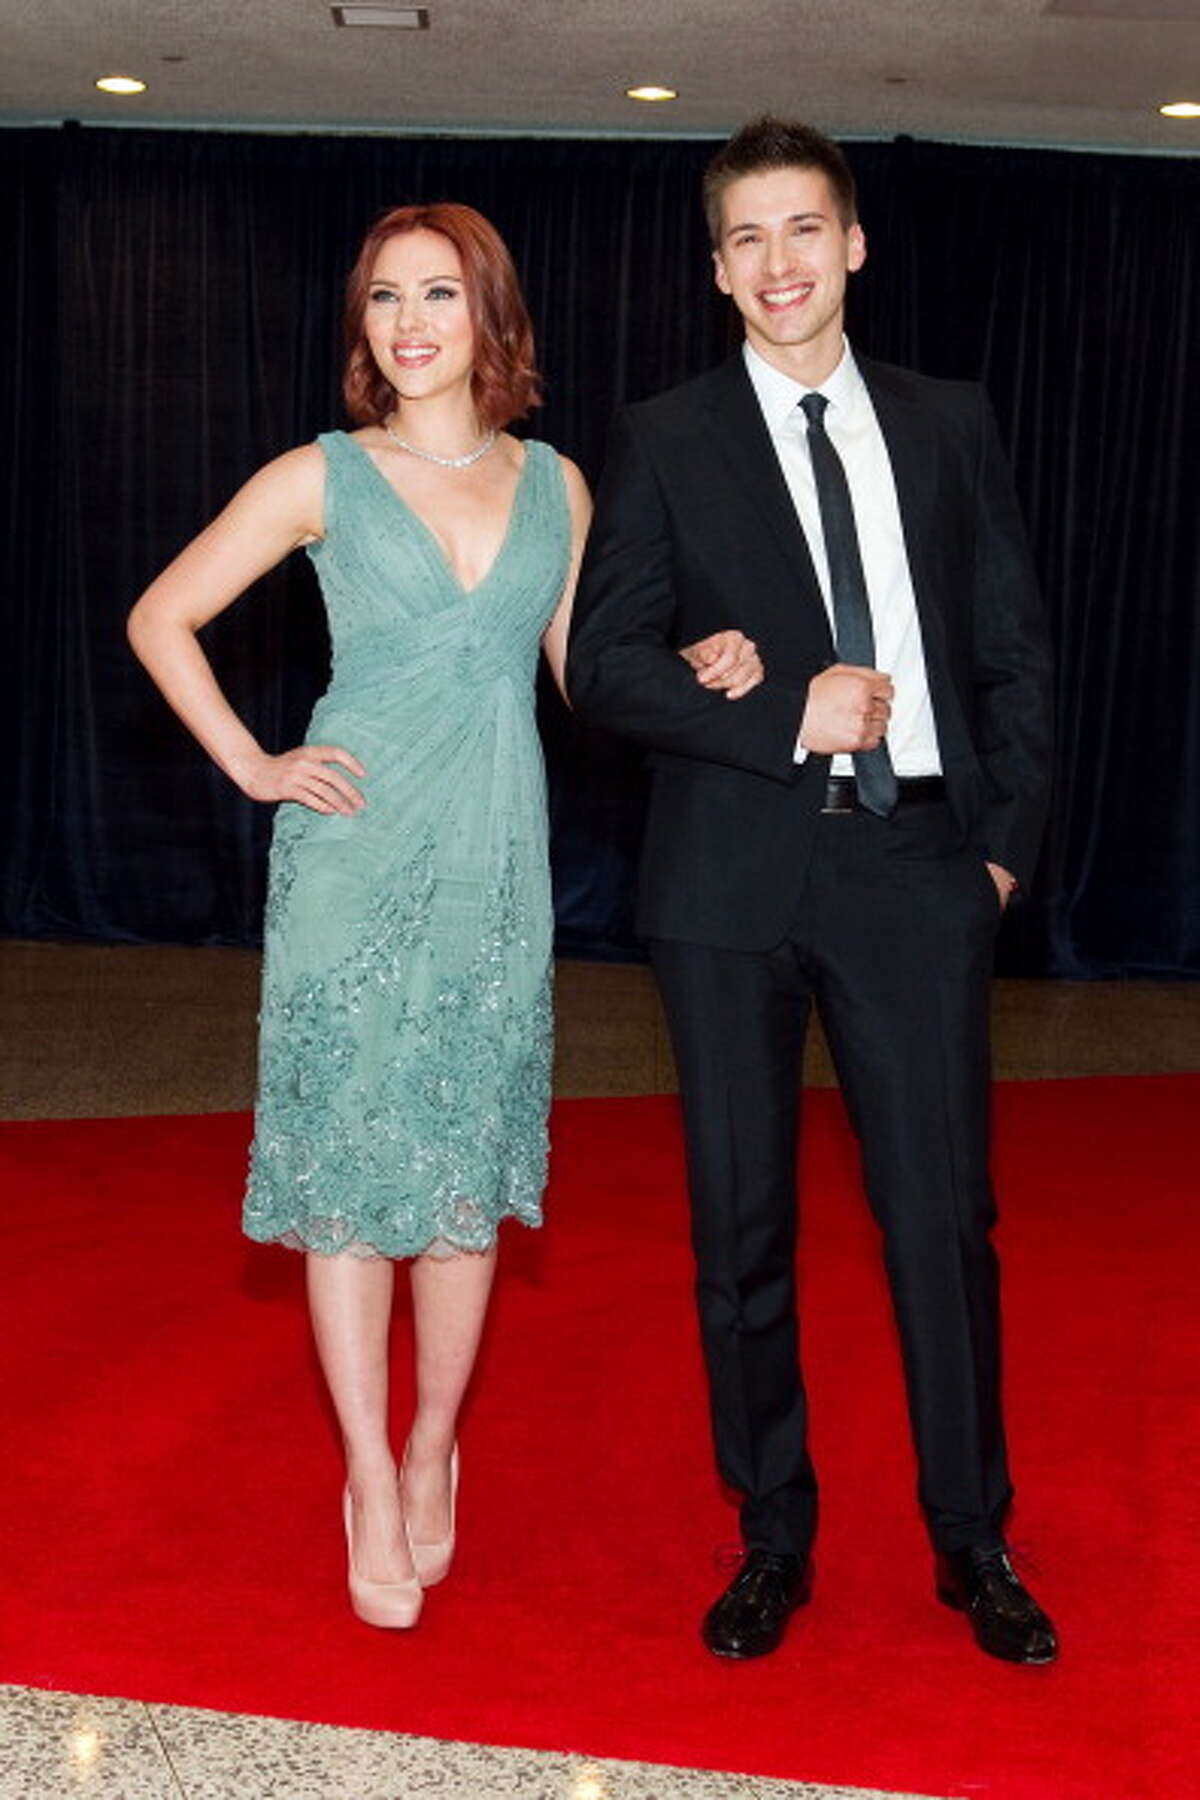 Scarlett Johansson and her twin brother Hunter Johansson who appeared with her in the film 'Manny & Lo.' Source: Wikipedia